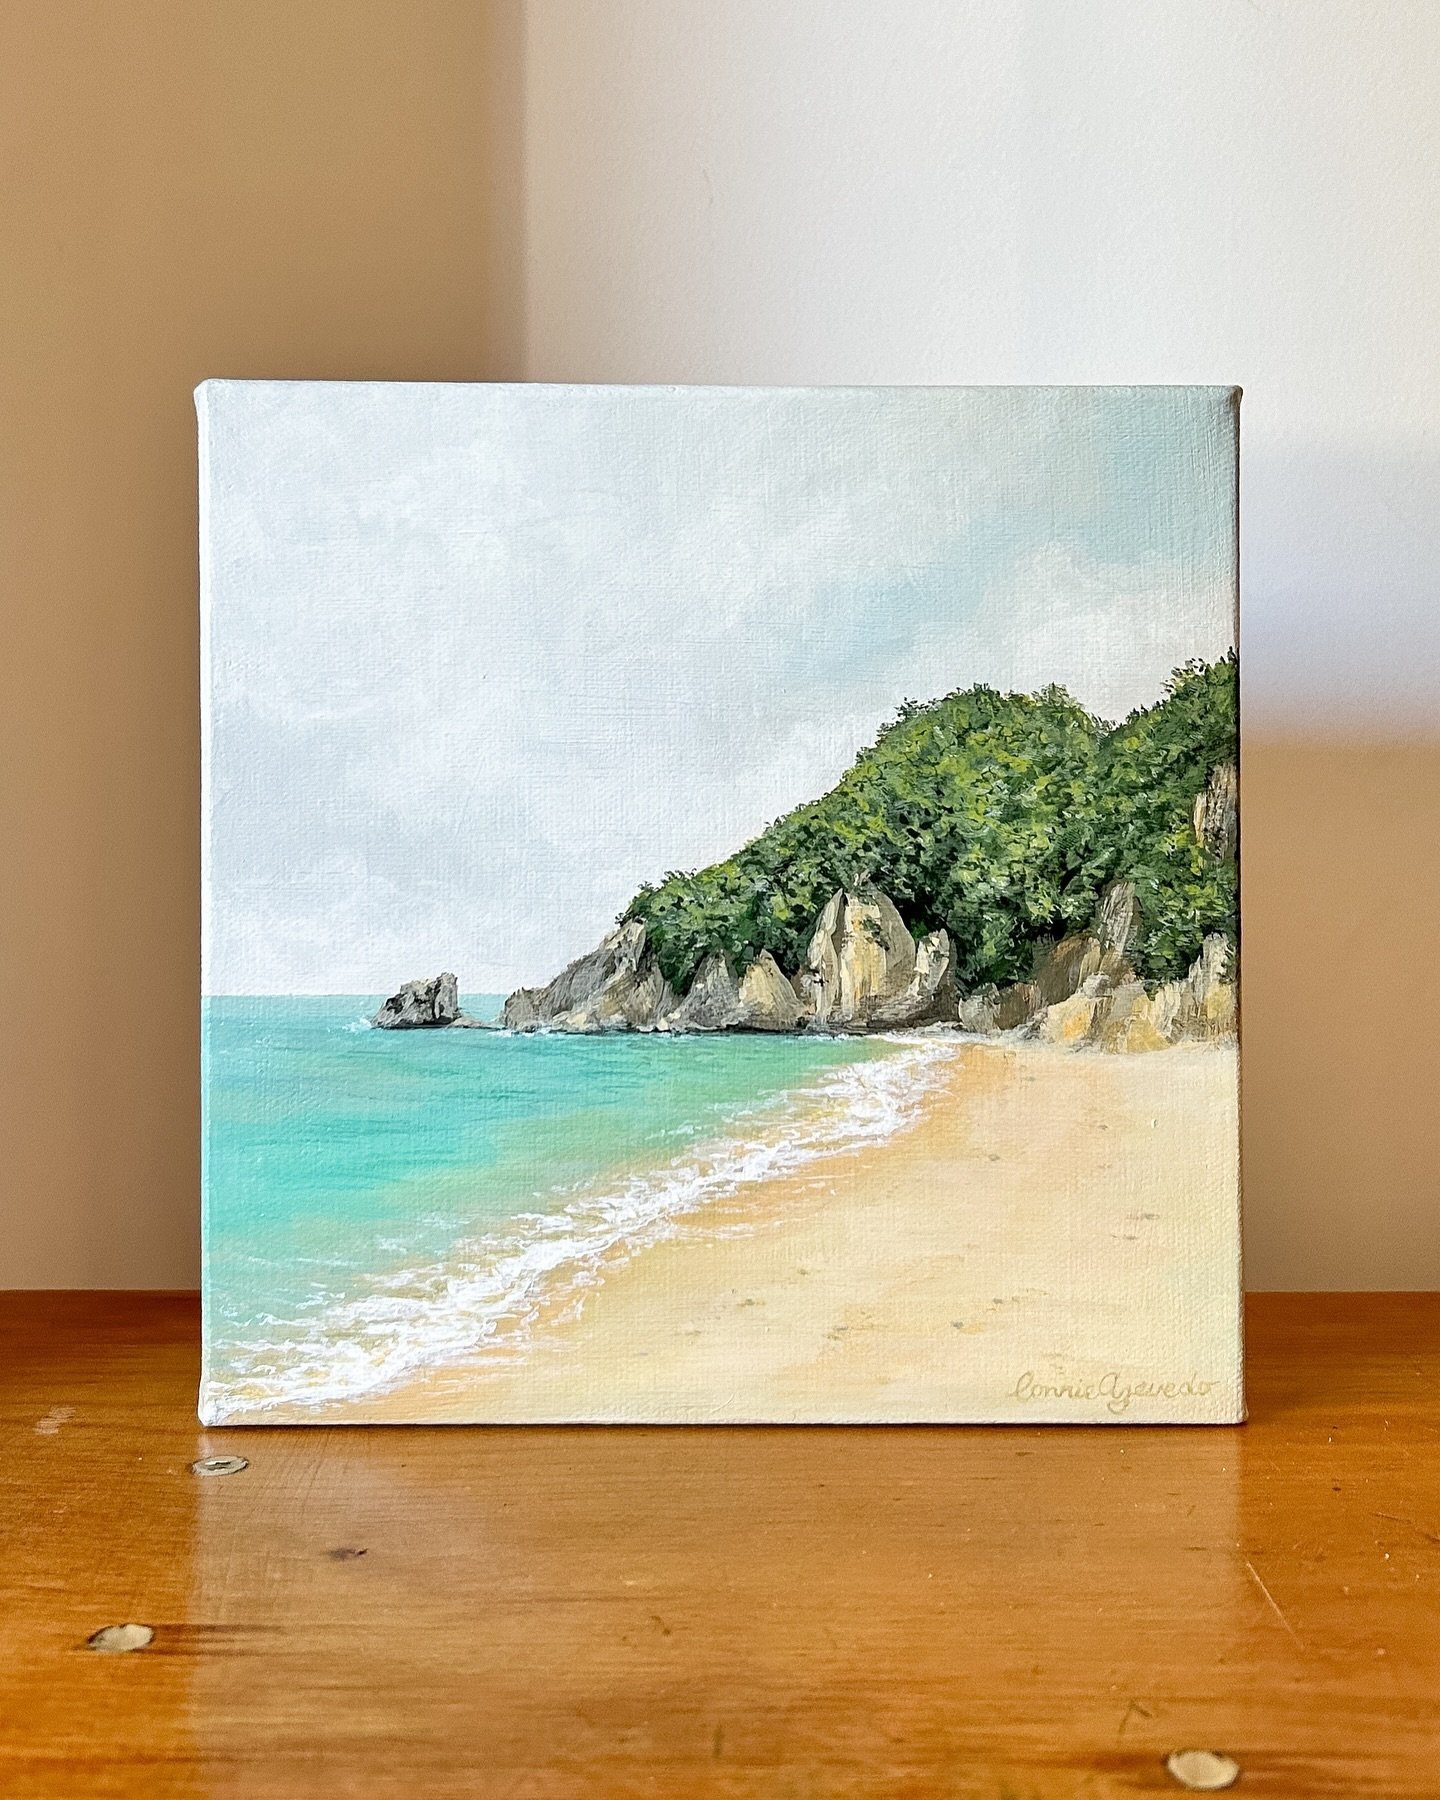 &lsquo;A secluded haven&rsquo; ✨
Acrylic, 8x8in. 

Inspired by a gorgeous little island in the Marlborough Sounds. The perfect place for a picnic, a restful little sanctuary. 

Available at Art in the Park Greymouth April 27-28. 

#beautifulbeaches #